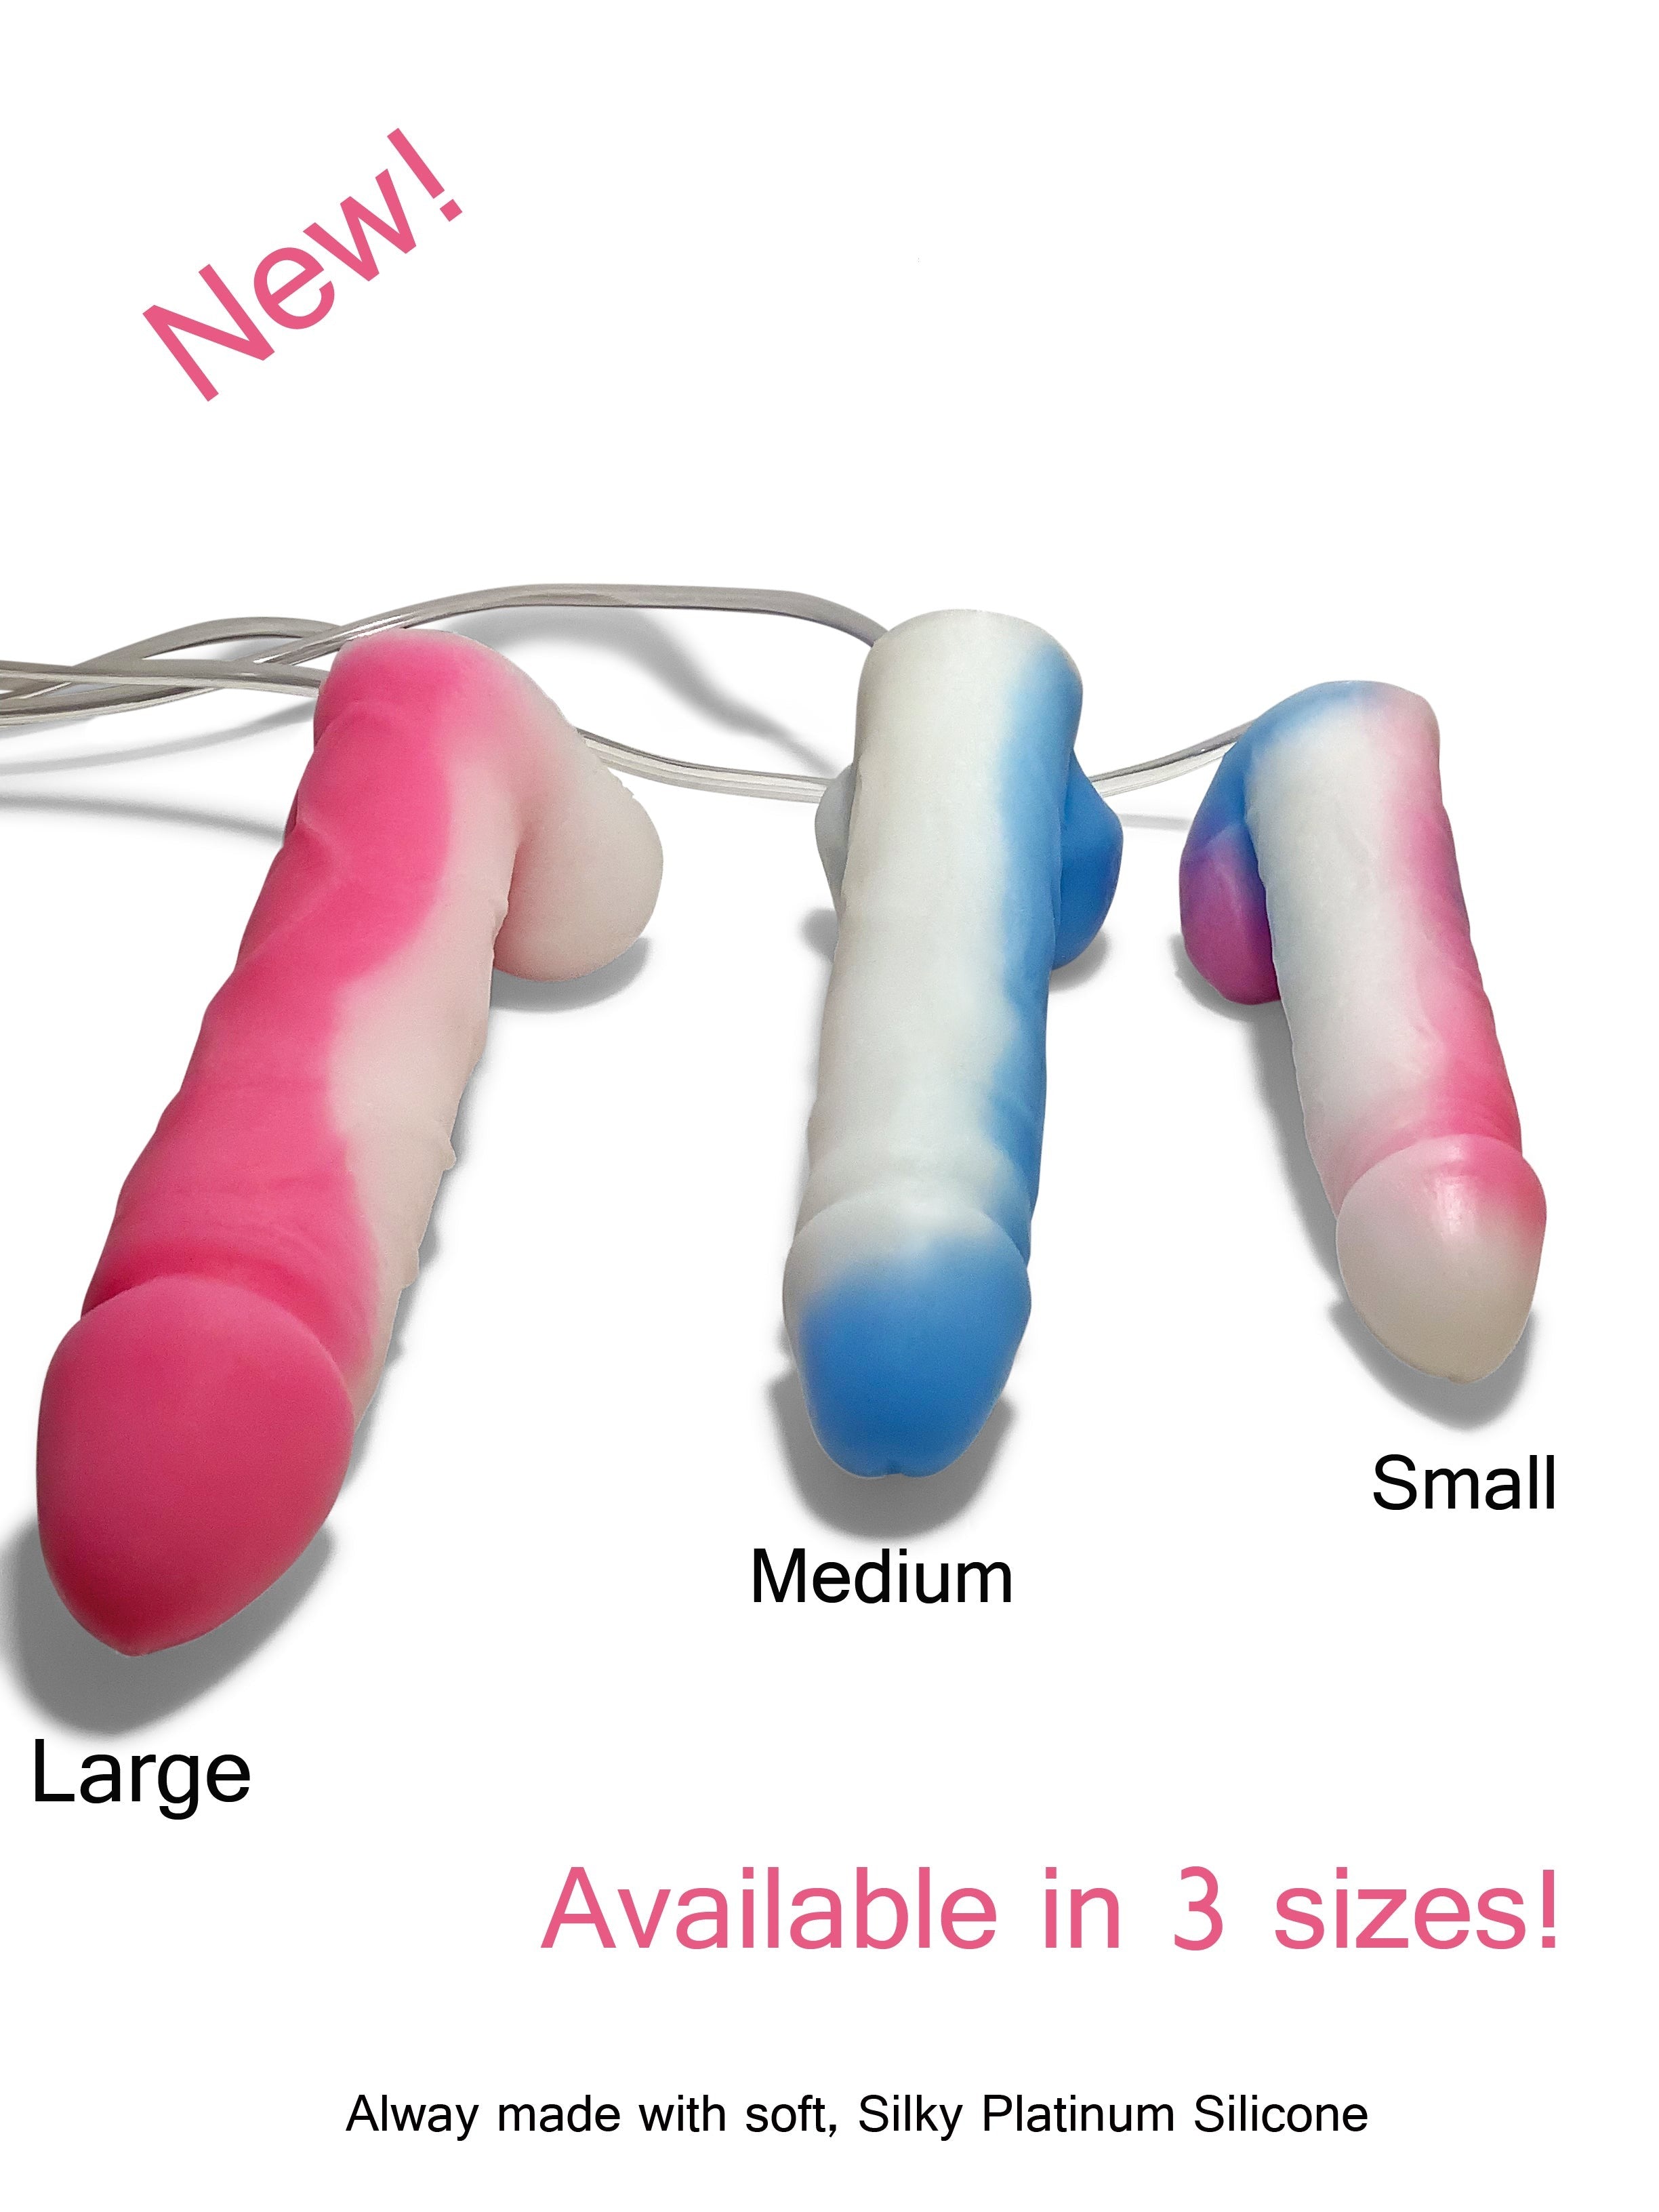 Squirting Dildo Ejaculating “Pinky XL” Penis sex toy super soft platin photo